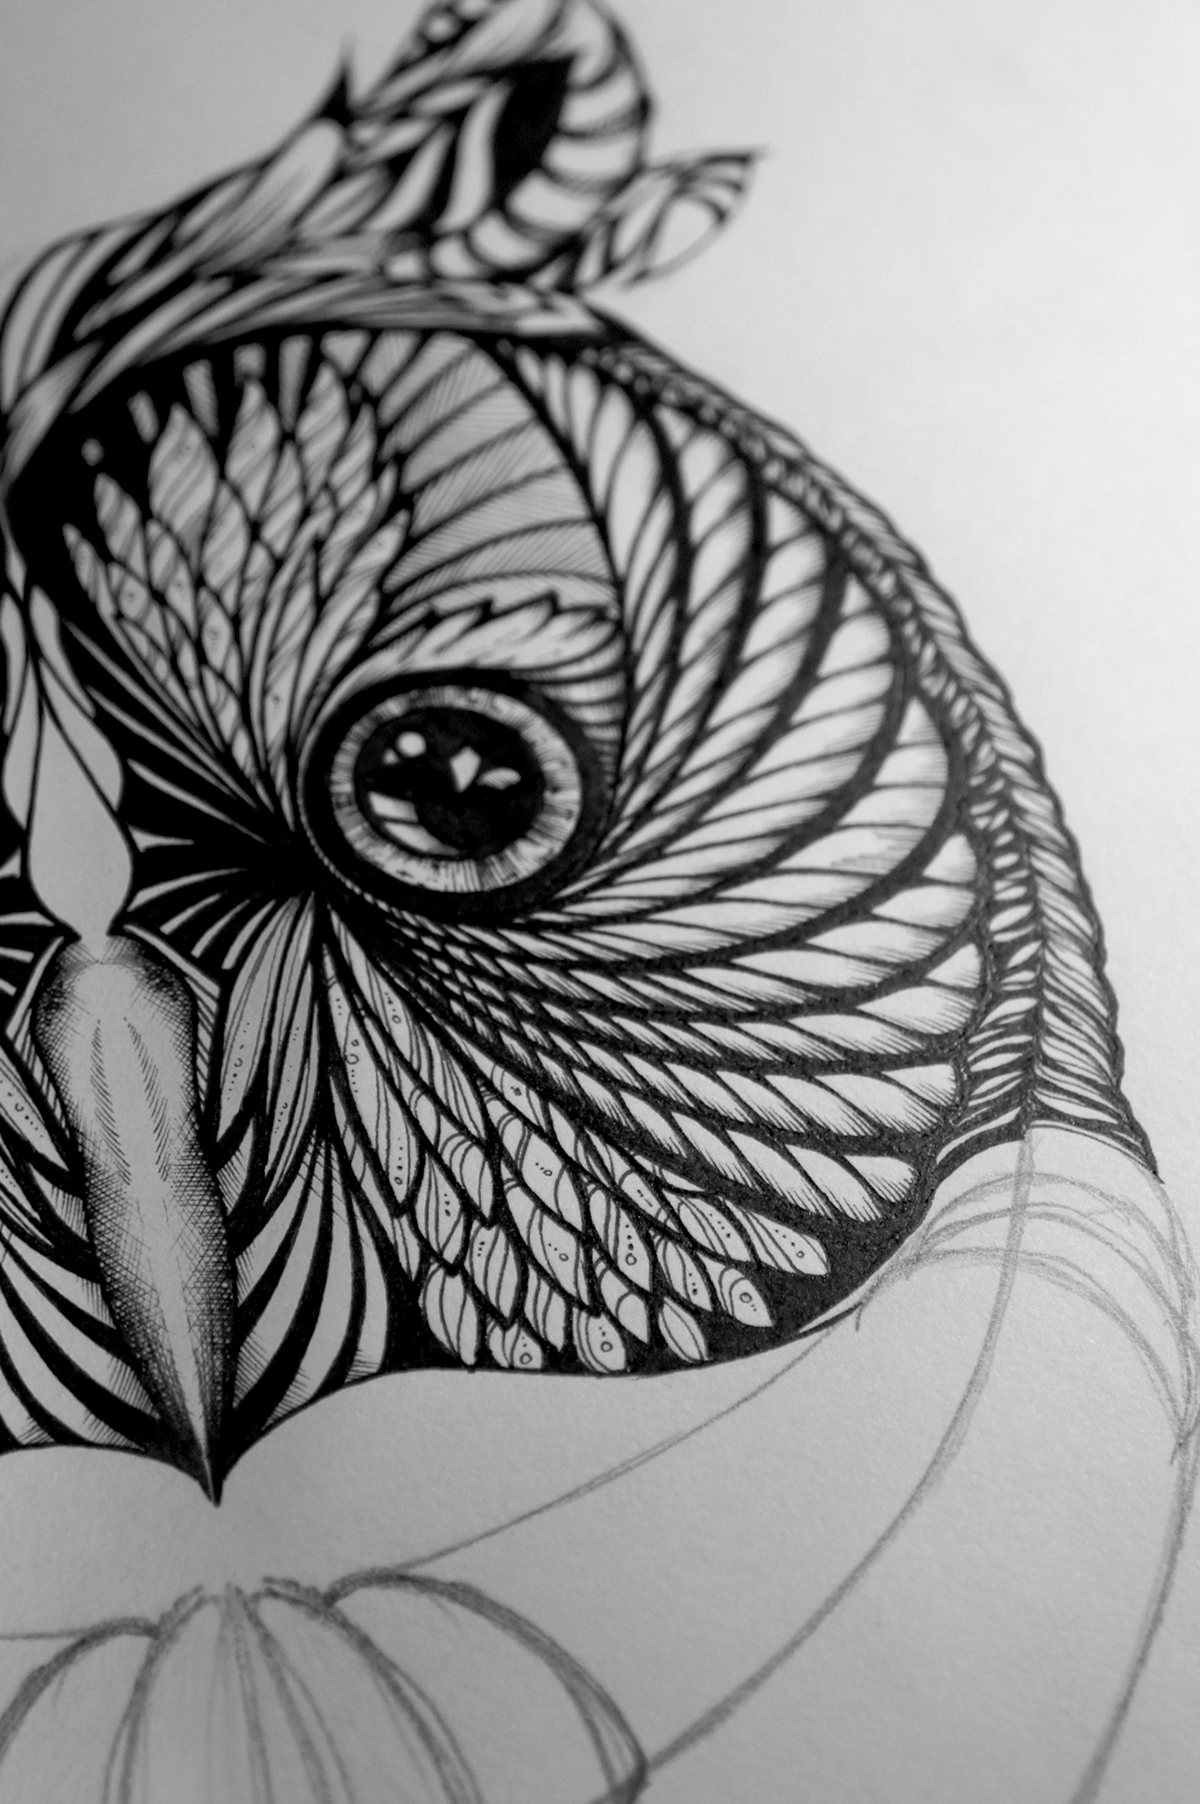 owl hand drawn eyes detail intricate pen black and white illustrating bird animal feathers pattern stripes ears